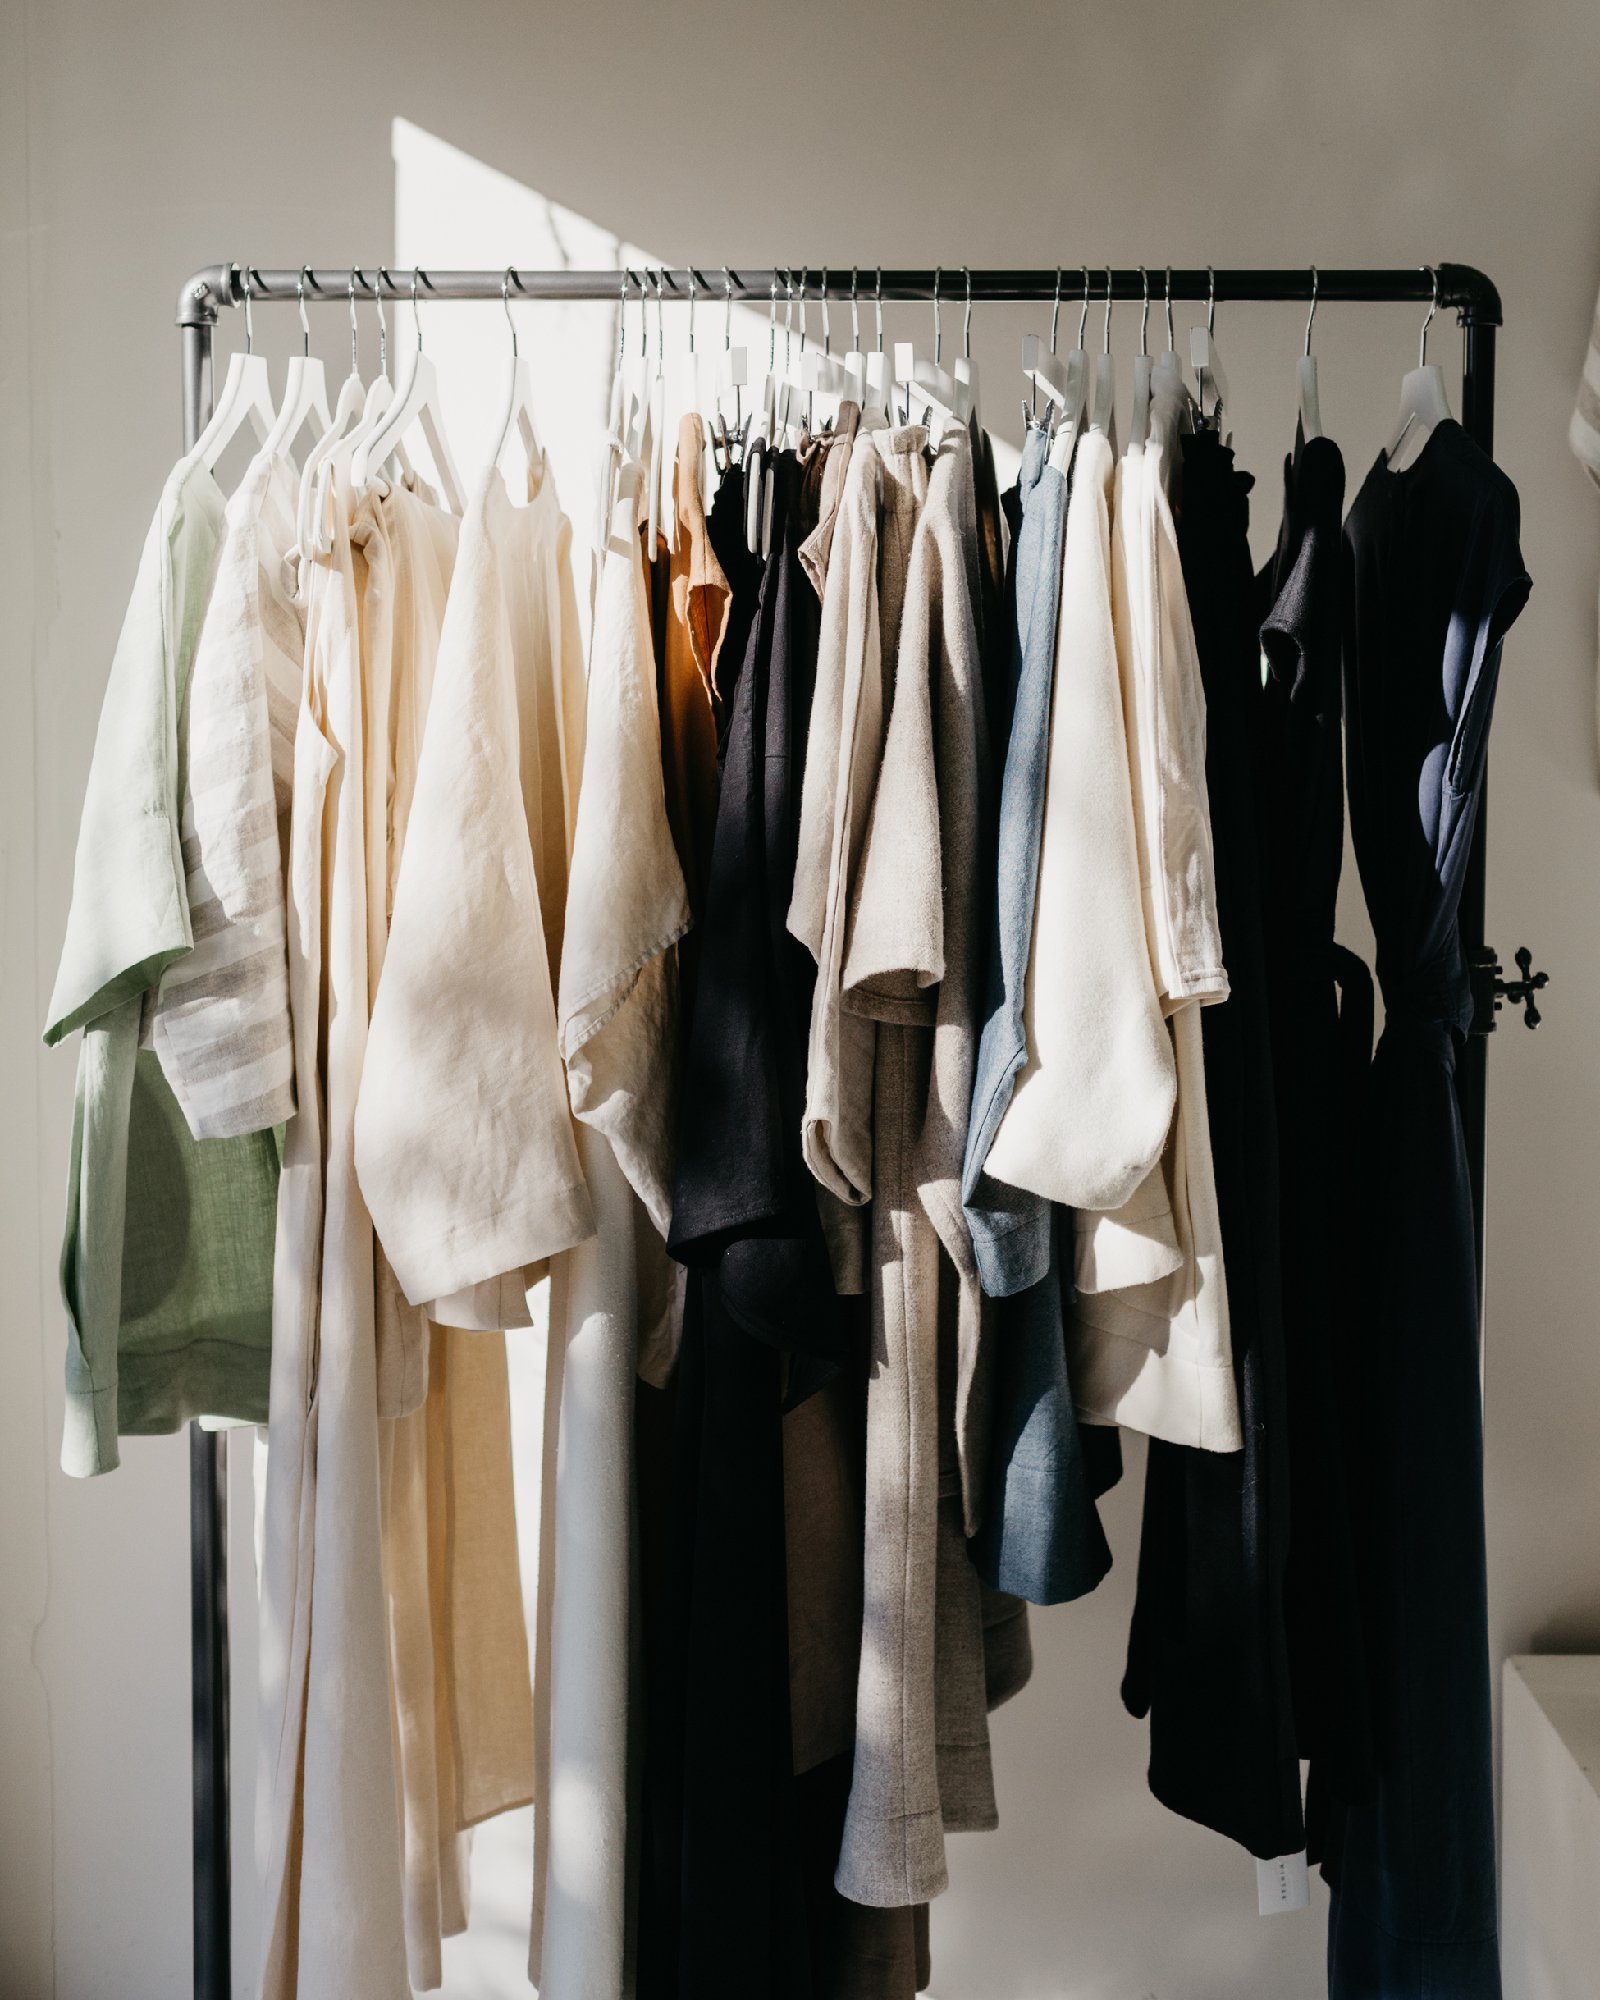 How To Donate Your Unwanted Clothes In A Sustainable Way